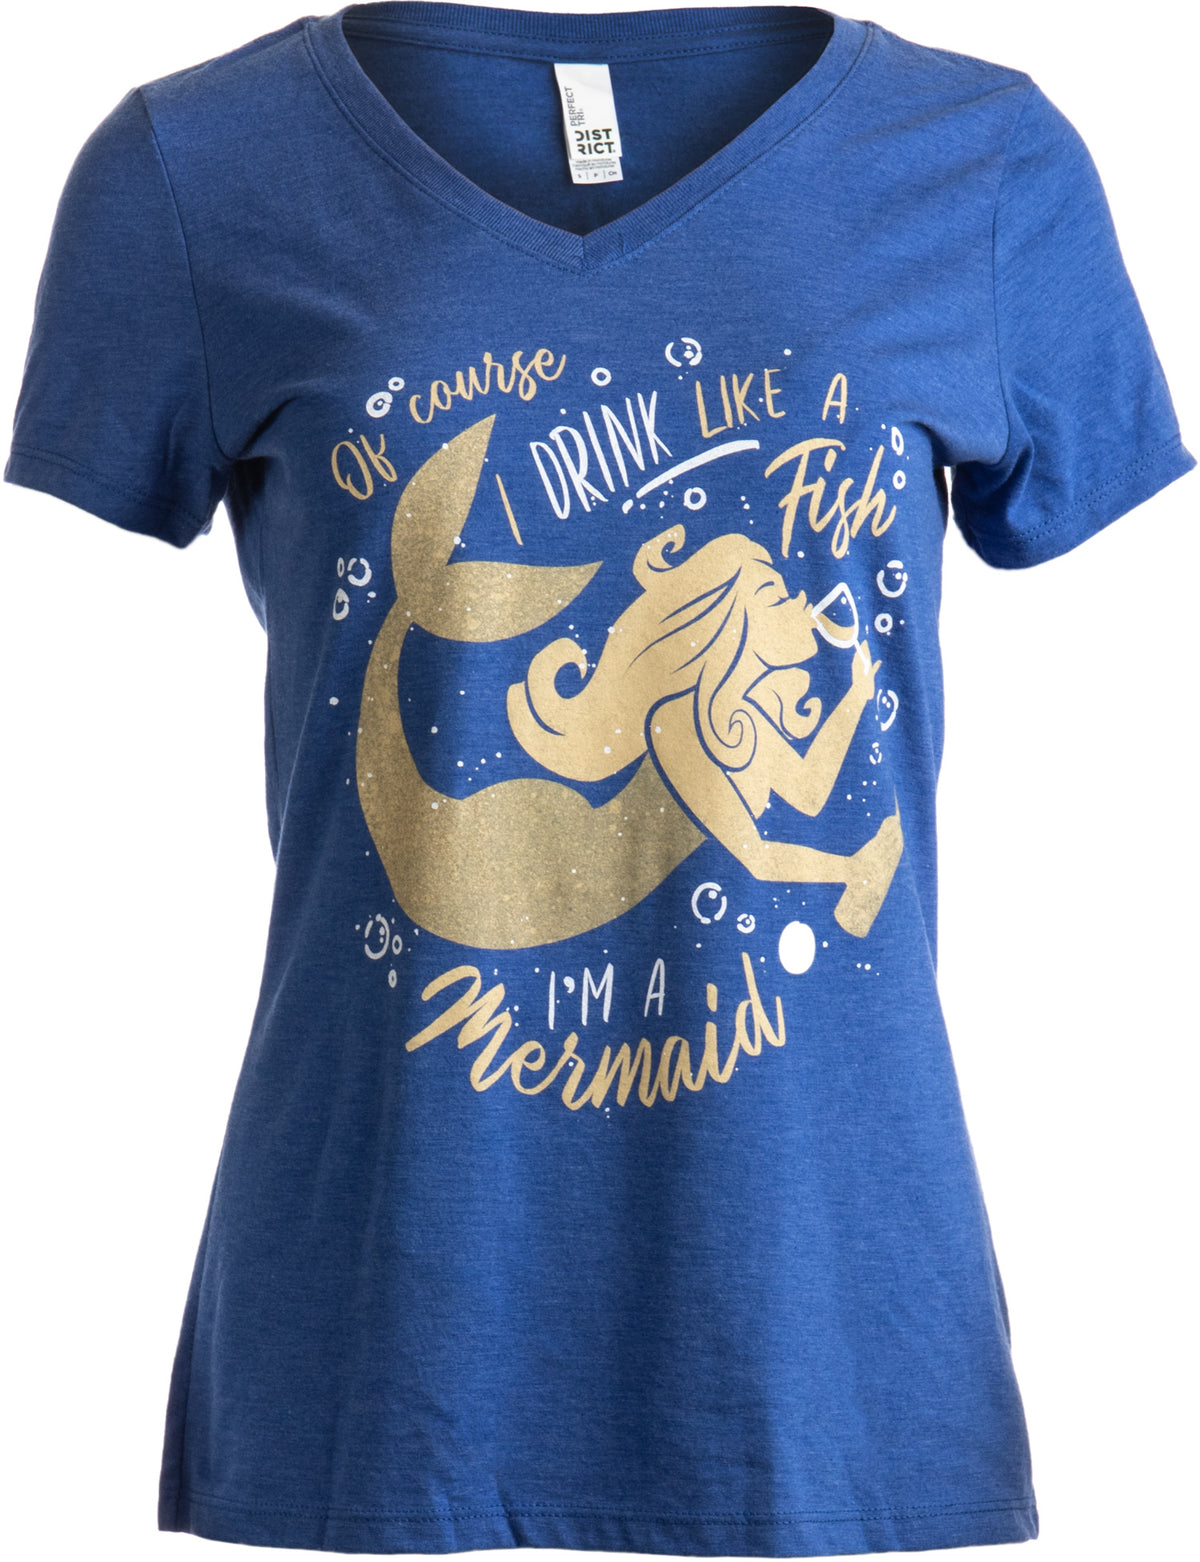 "Of Course I Drink Like a Fish, I'm a Mermaid" | Funny V-neck T-shirt - Women's